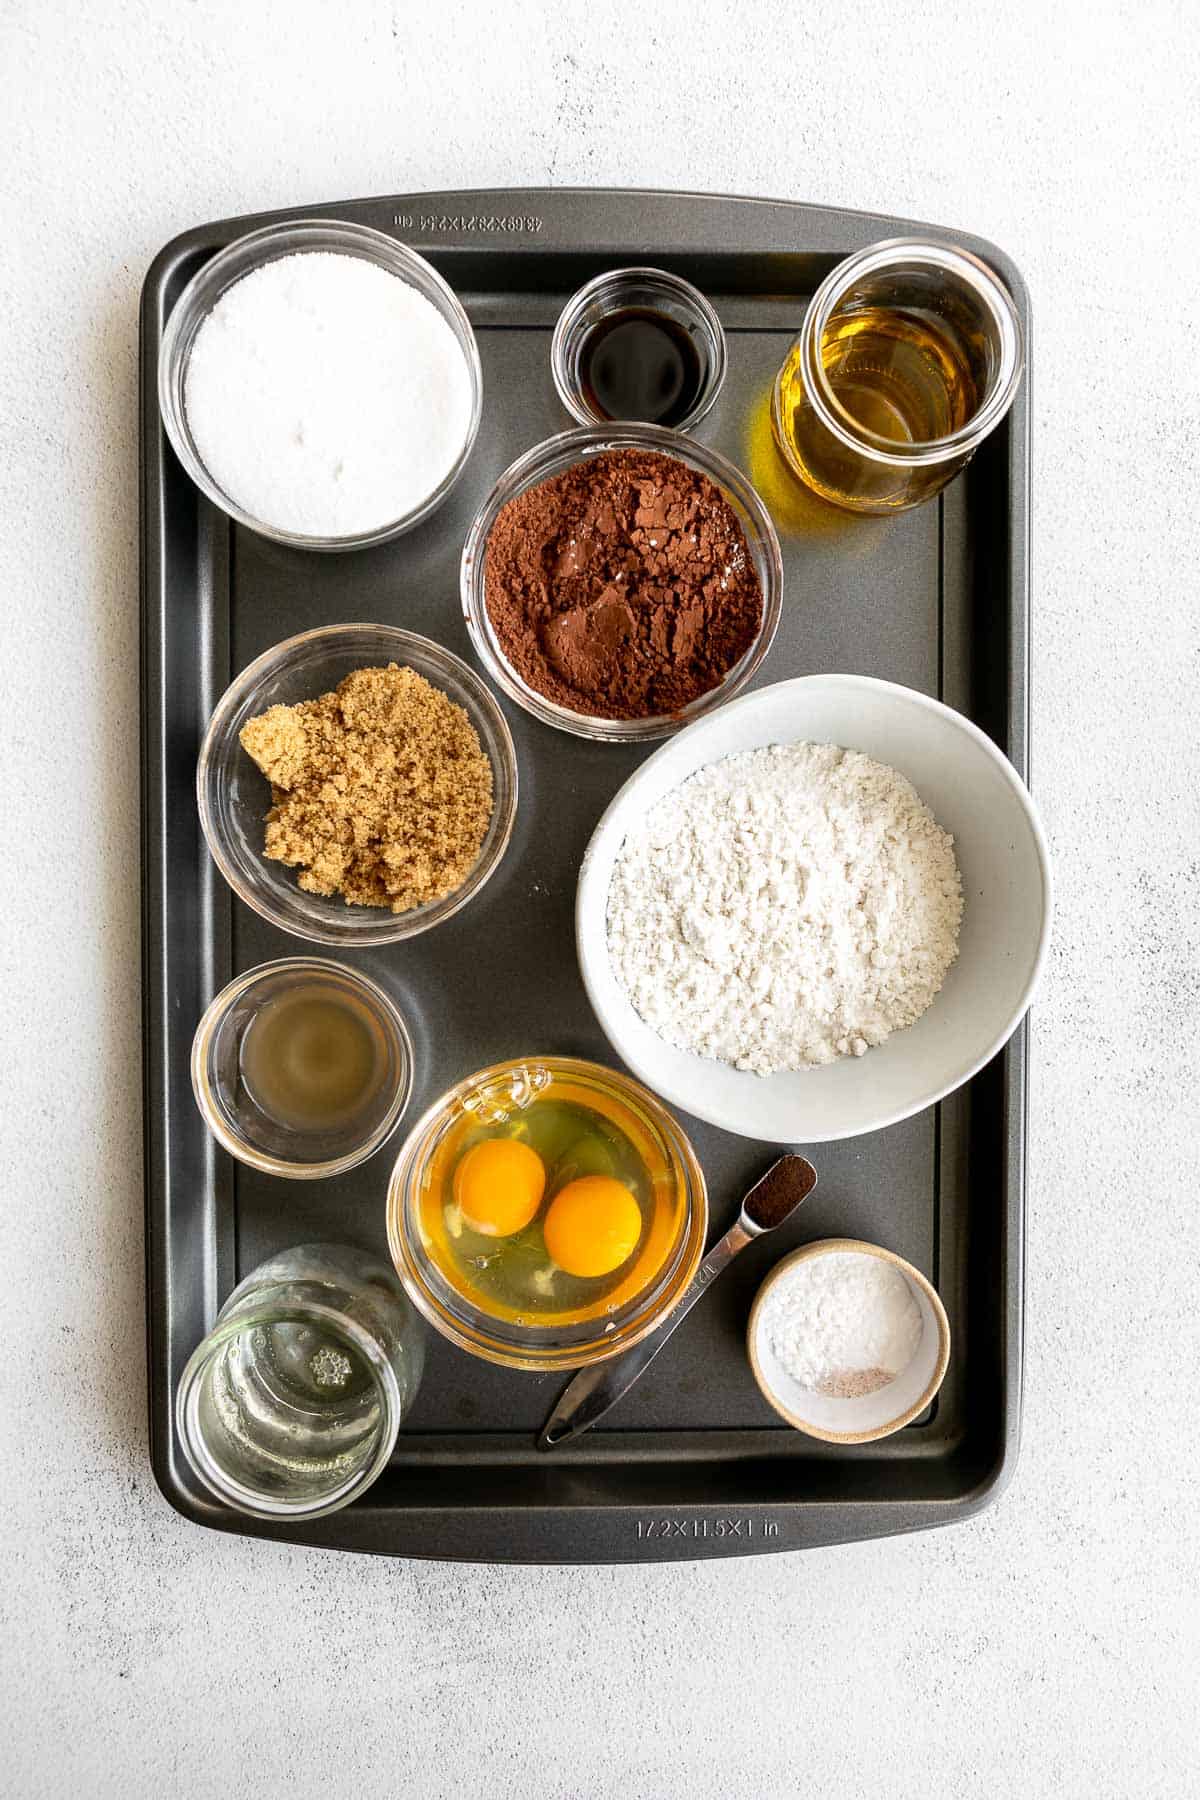 ingredients for the chocolate cupcakes